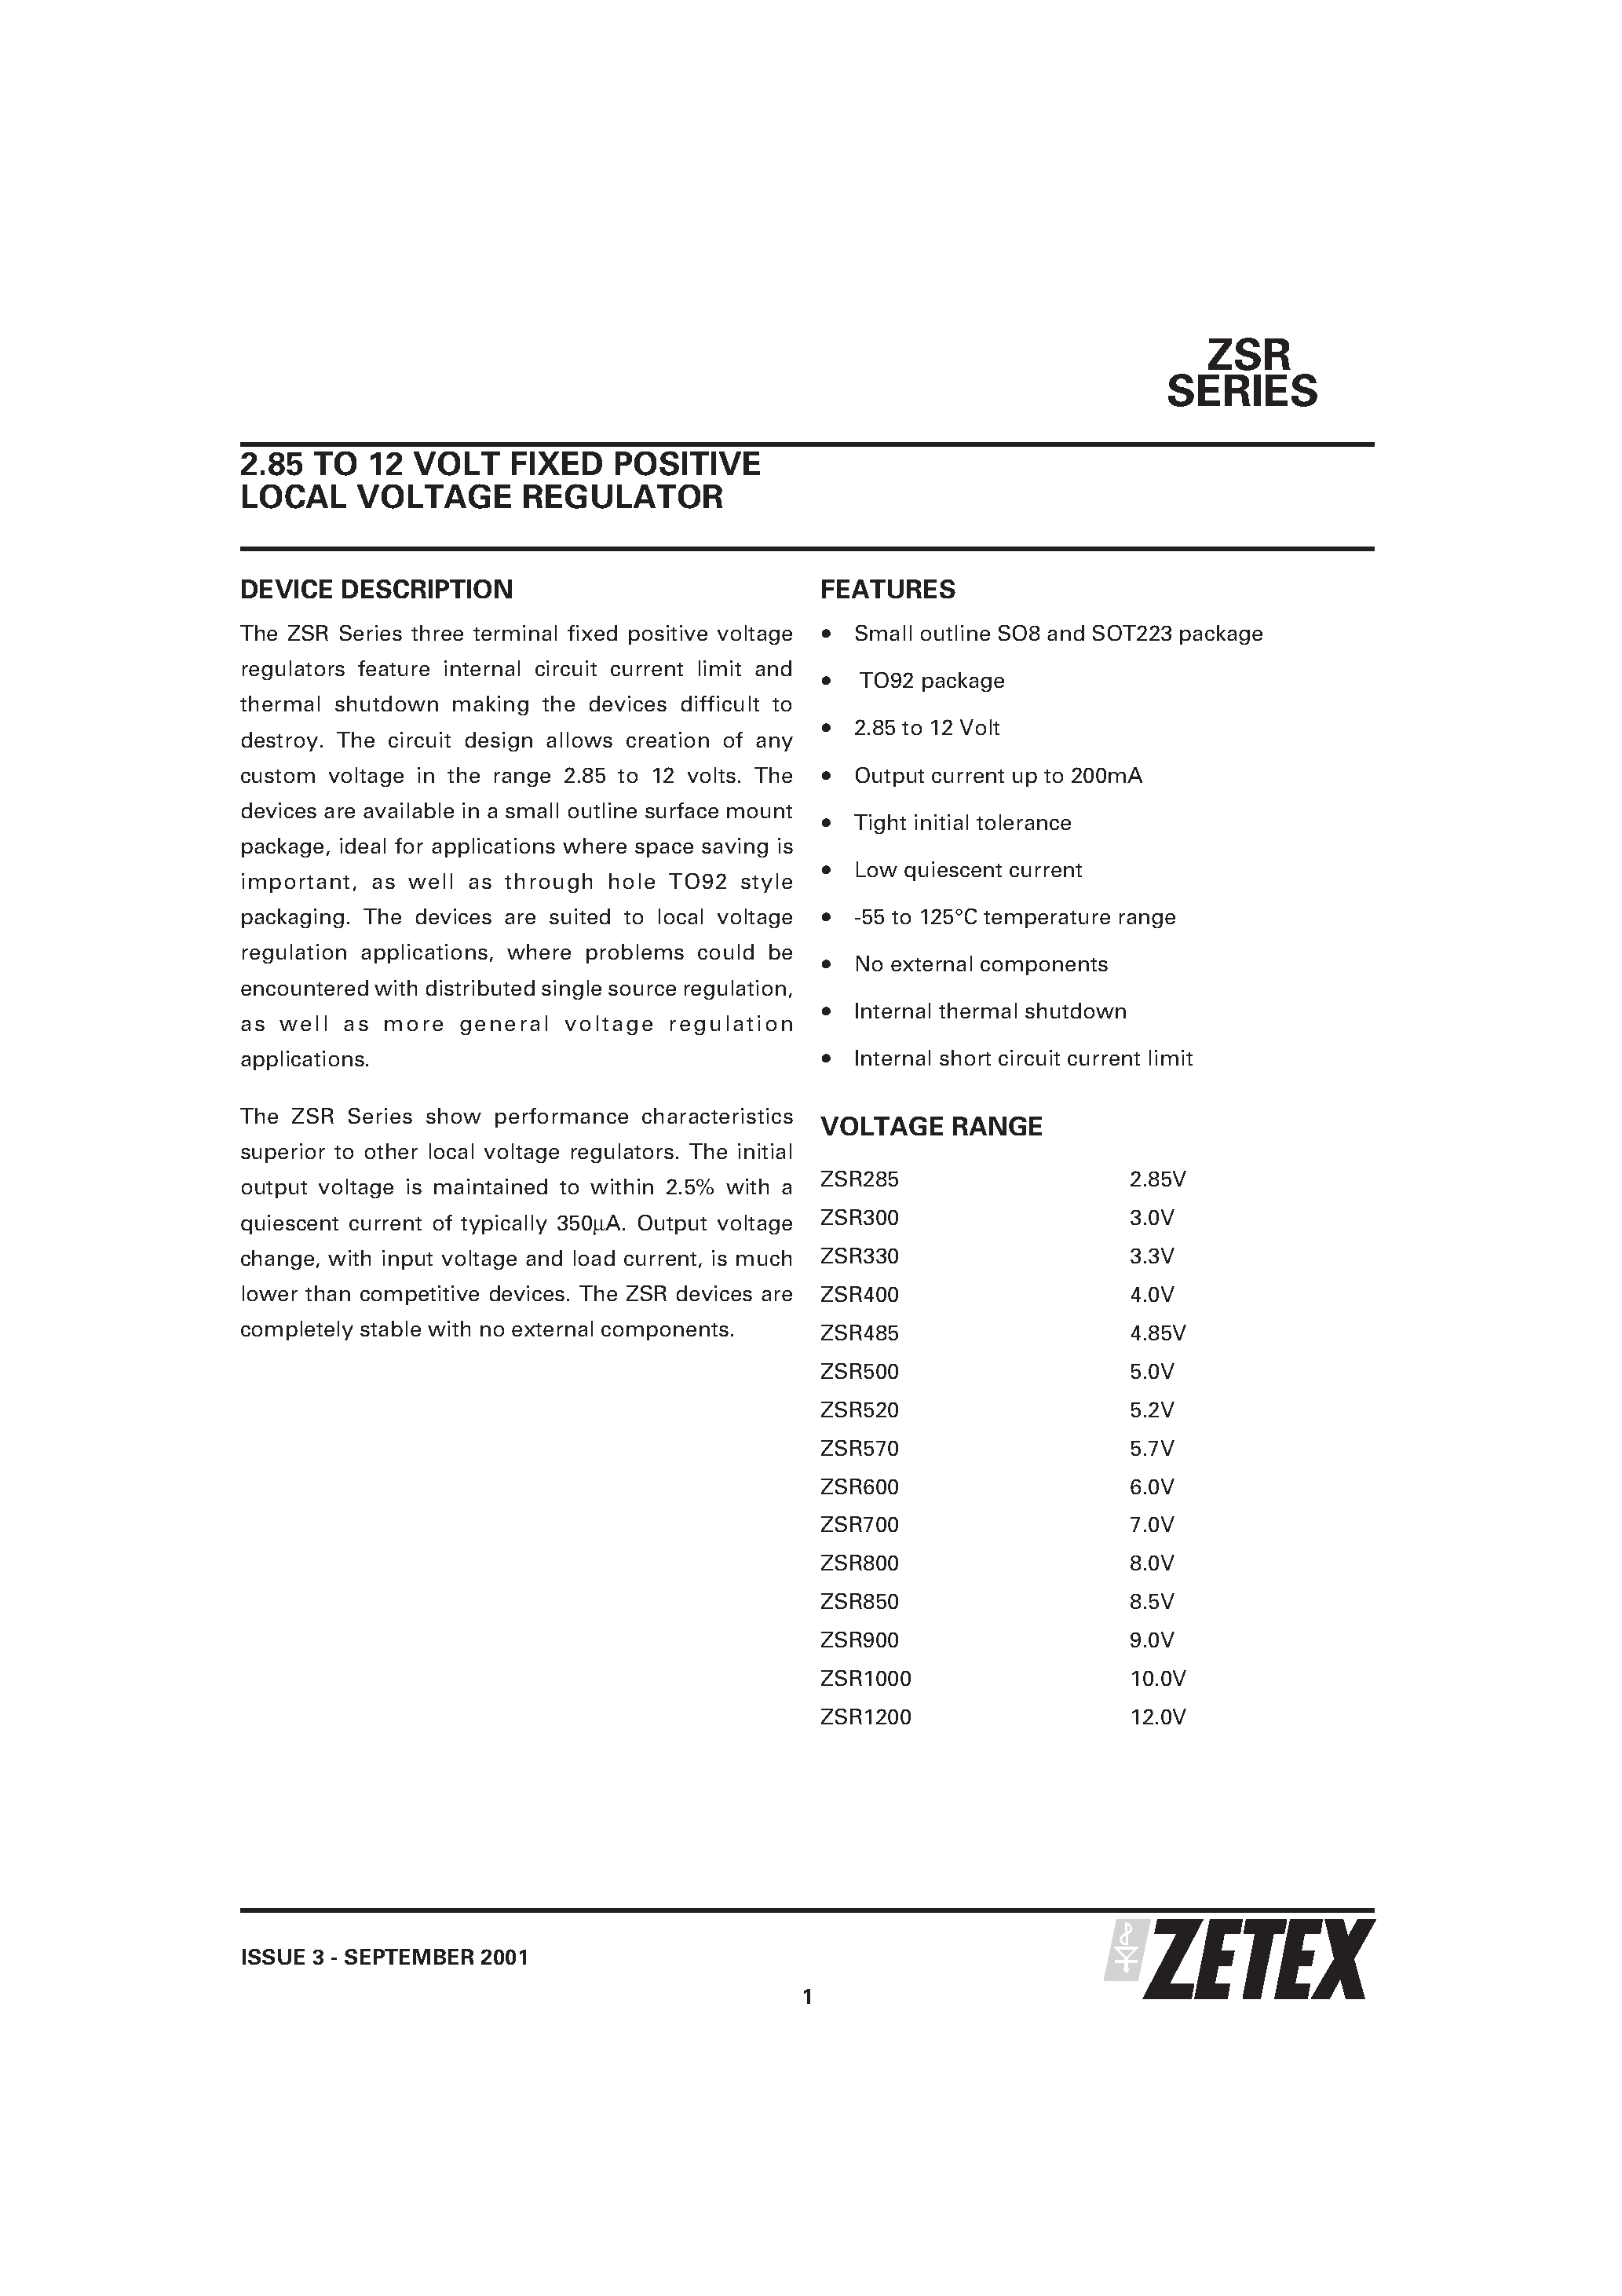 Datasheet ZSR850G - 2.85 TO 12 VOLT FIXED POSITIVE LOCAL VOLTAGE REGULATOR page 1